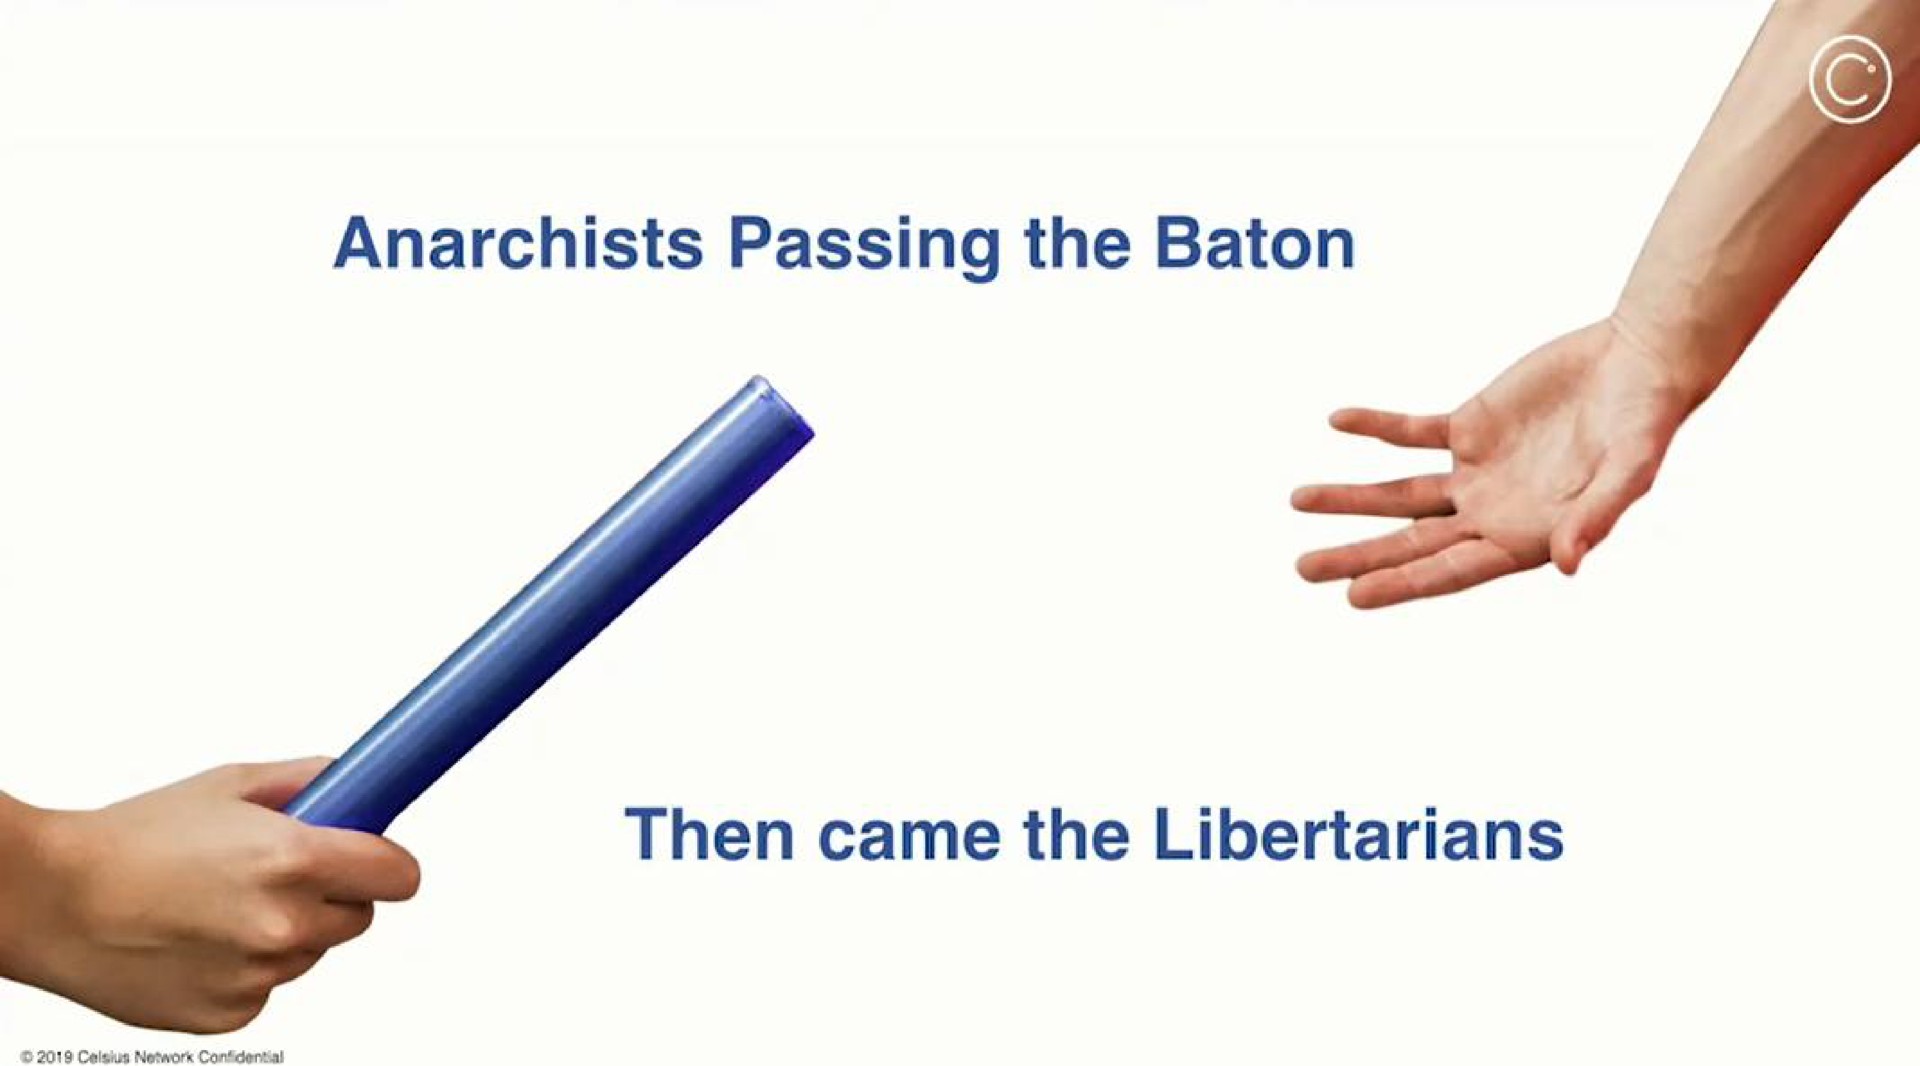 anarchists passing the baton then came the libertarians | Celsius Network